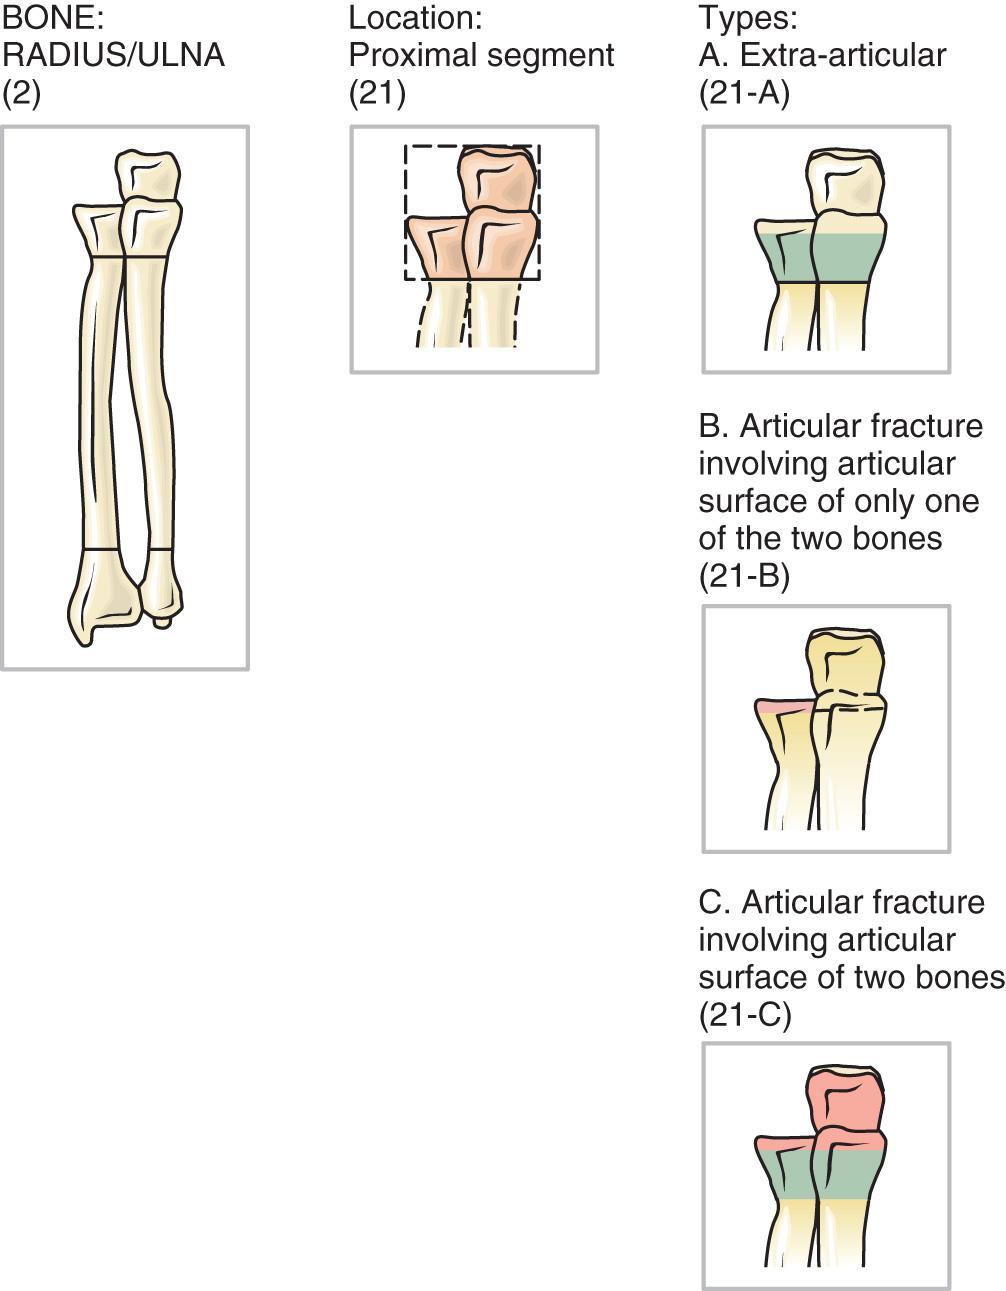 FIG 42.1, The AO classification accounts for fractures of both the proximal radius and ulna as fracture site (2) for radius/ulna, and (21) for the proximal segment of the radius and ulna. Type A fractures are extraarticular, type B fractures are intraarticular fractures involving the articular surface of either the radius or the ulna, and type C fractures are those involving the articular surface of both bones. Additional subtypes denote comminution, displacement, and location.